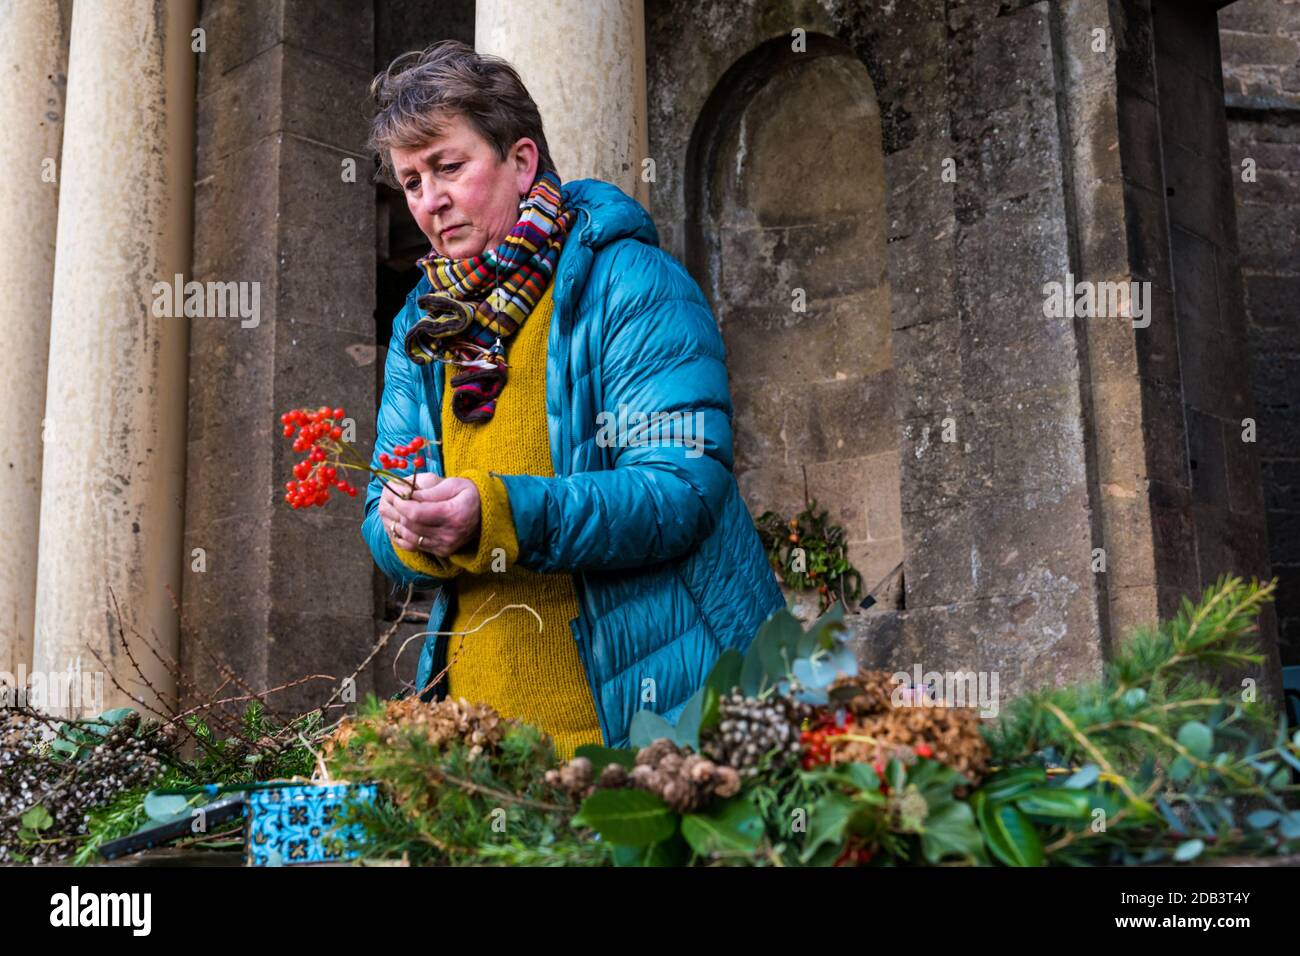 Haddington, East Lothian, Scotland, UK, Flowersmith prepares for Christmas:  Ruth Alder, a flowersmith, weaves willow into wreaths to decorate for Christmas using foliage and flowers from Amisfield Walled Garden where she is a volunteer. Amisfield Walled garden is an 18th century garden managed by the Amisfield Preservation Trust and is free to visit all year round. Pictured: Ruth attaches flowers and foliage gathered from the walled garden Stock Photo